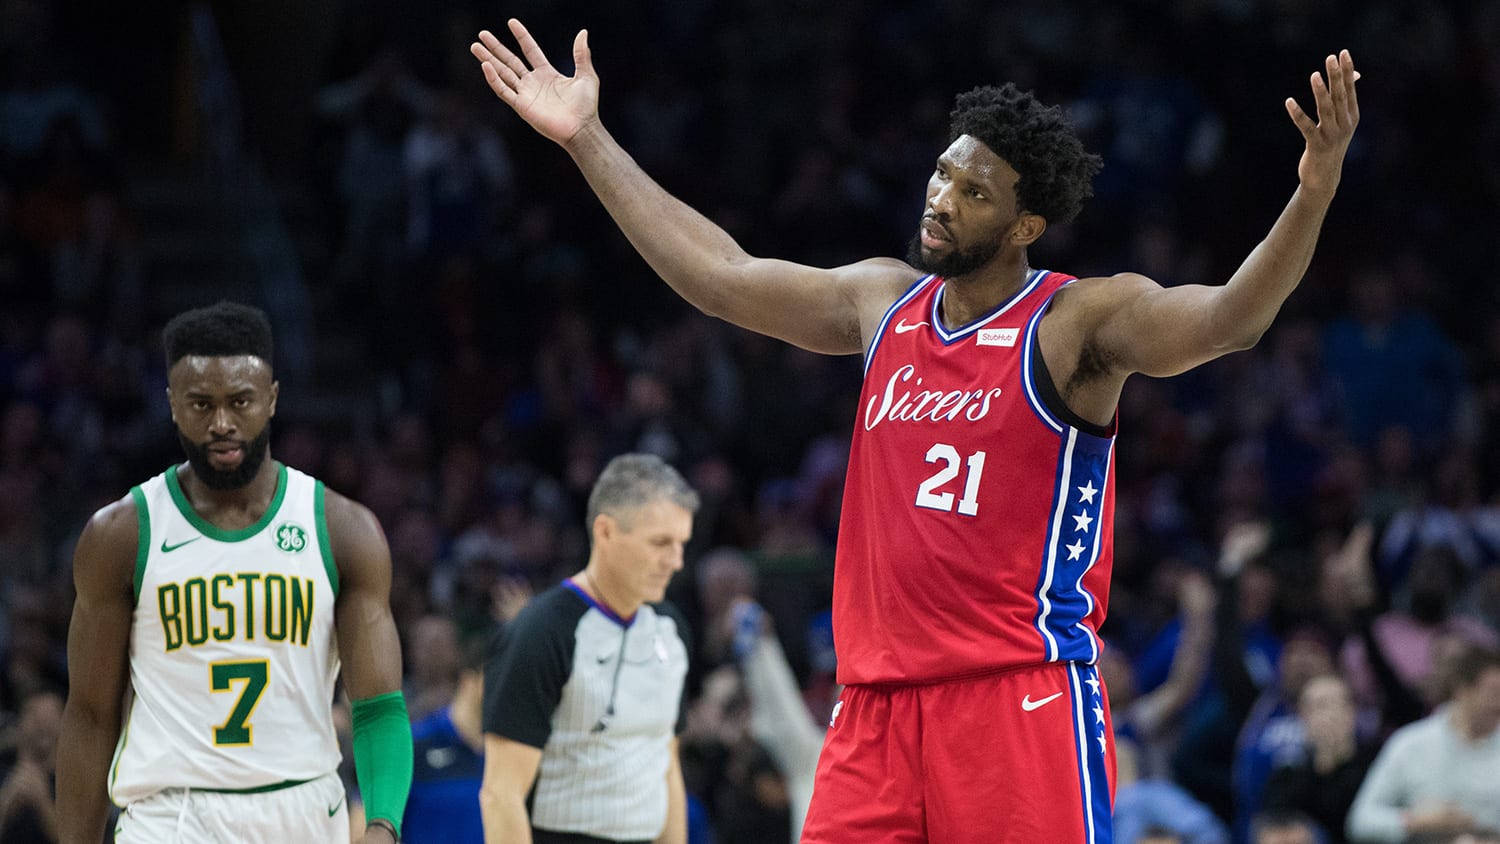 NBA: Celtics vs Sixers is a playoff matchup possibility.